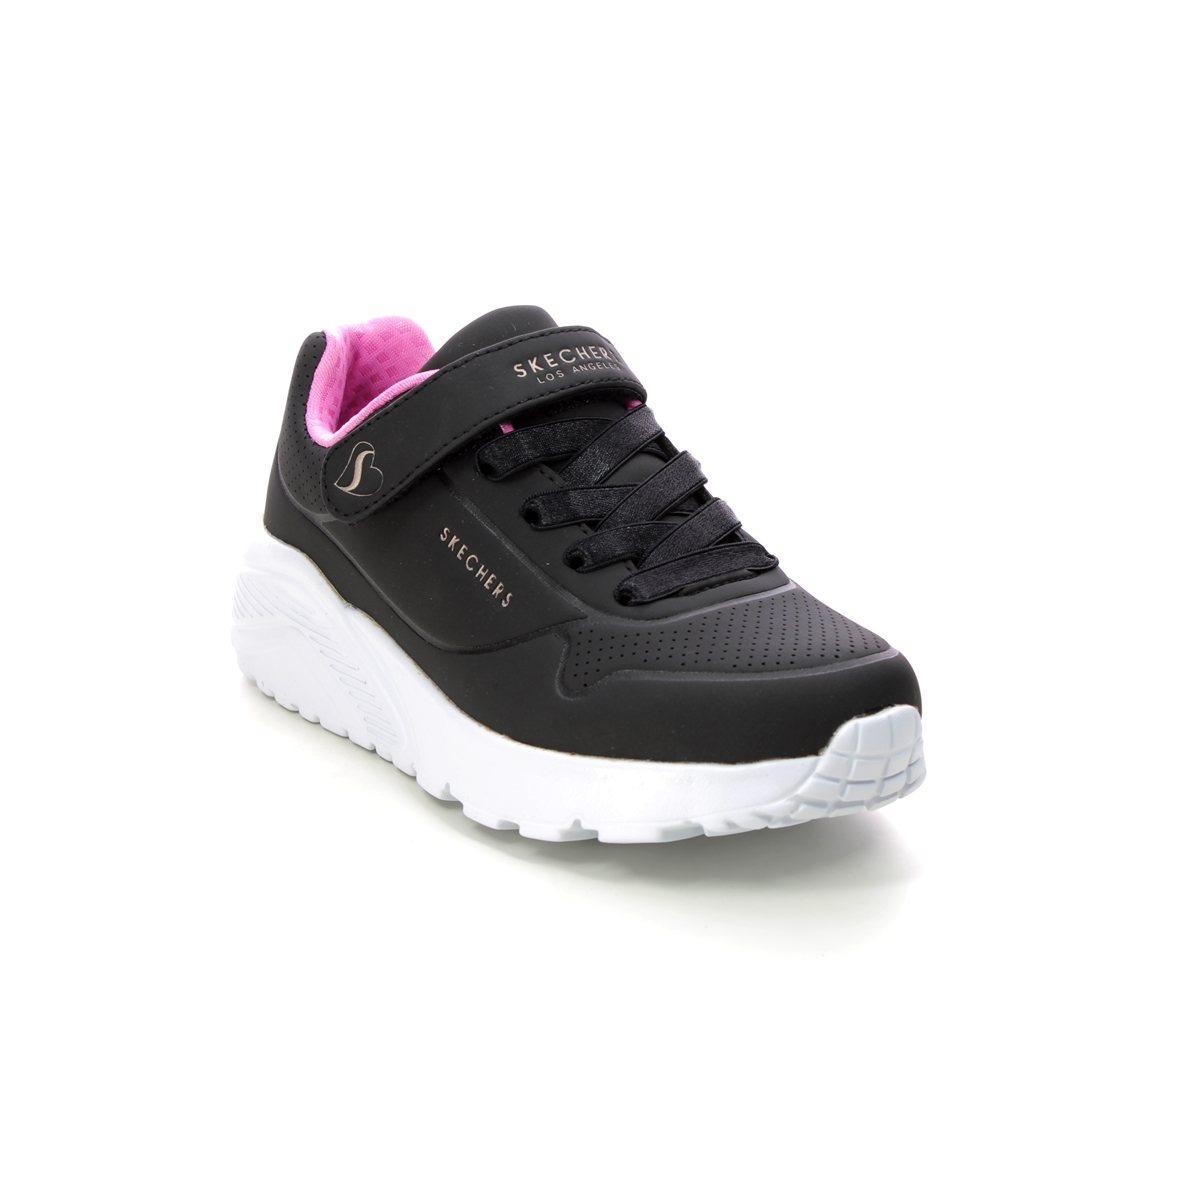 Skechers Uno Lite Bungee Black Rose Gold Kids Girls Trainers 310451L In Size 32 In Plain Black Rose Gold For kids